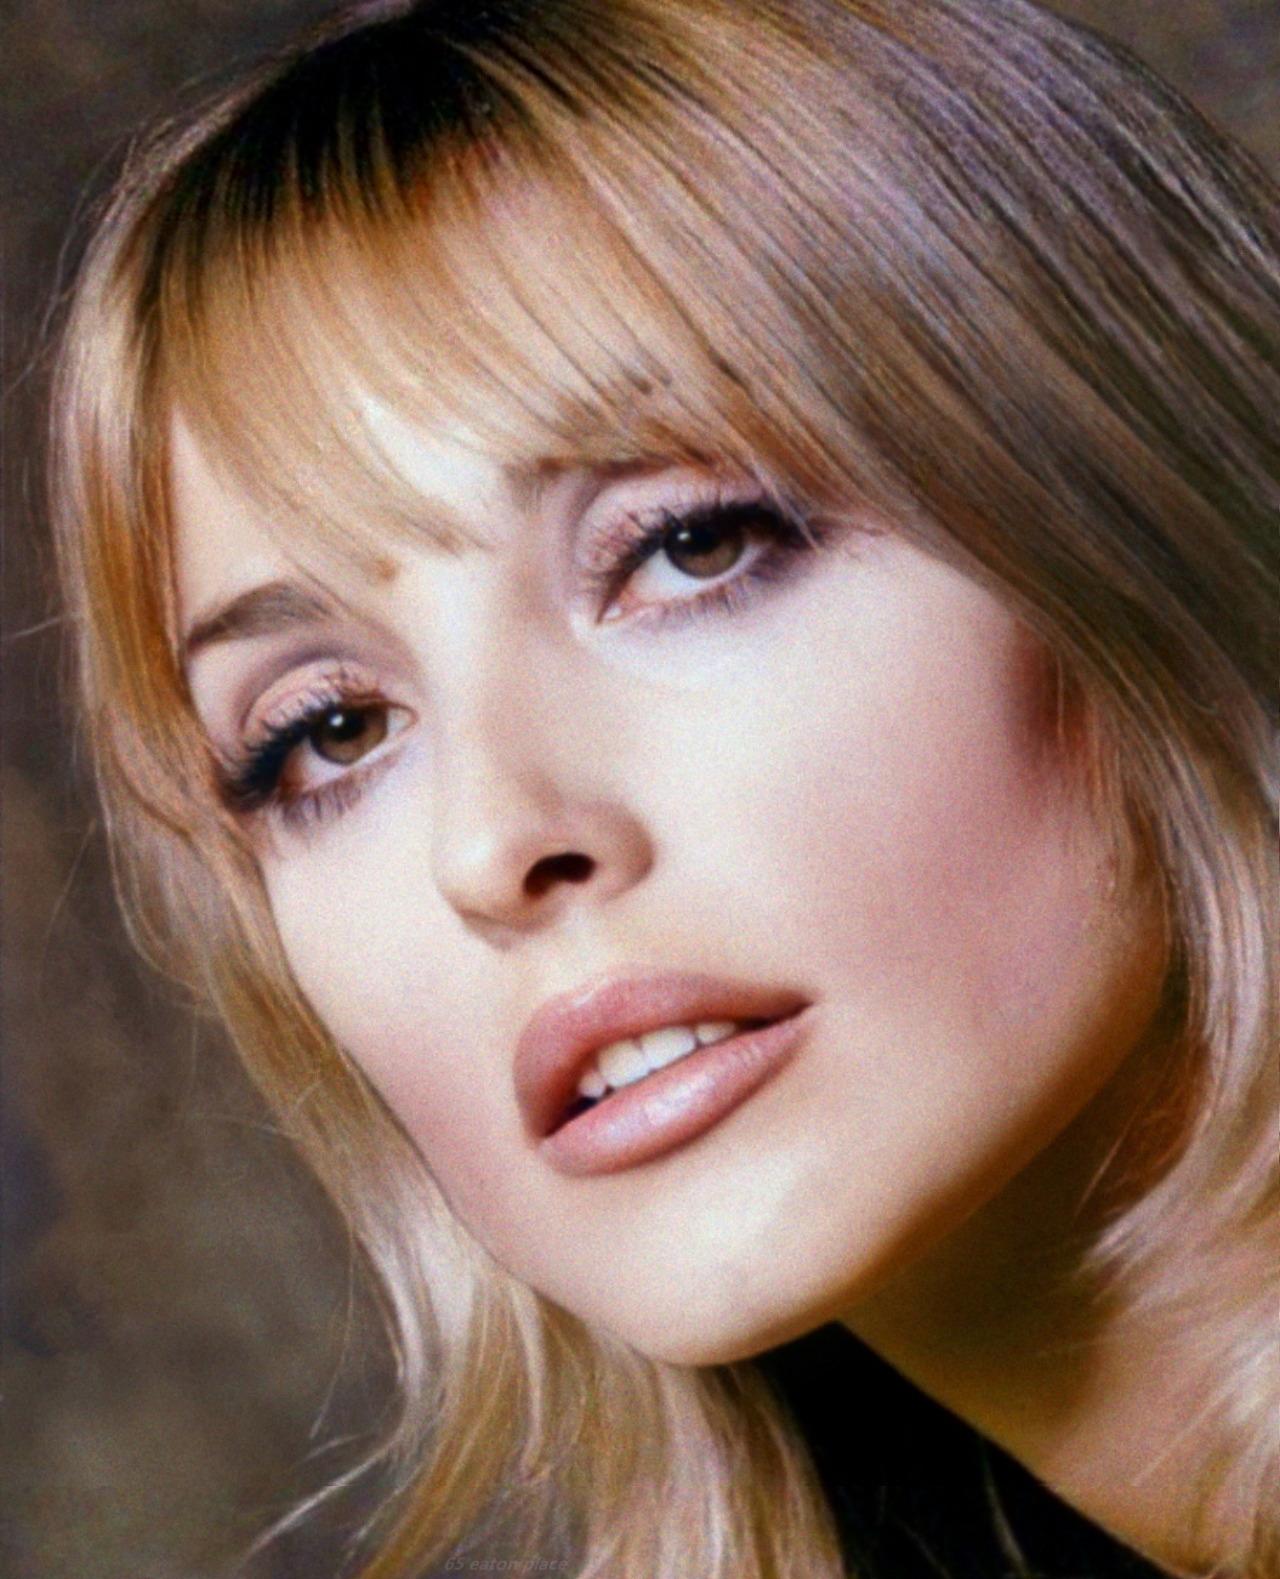 65eatonplace:
“ Sharon Tate, photographed in 1966 by Milton H. Greene
”